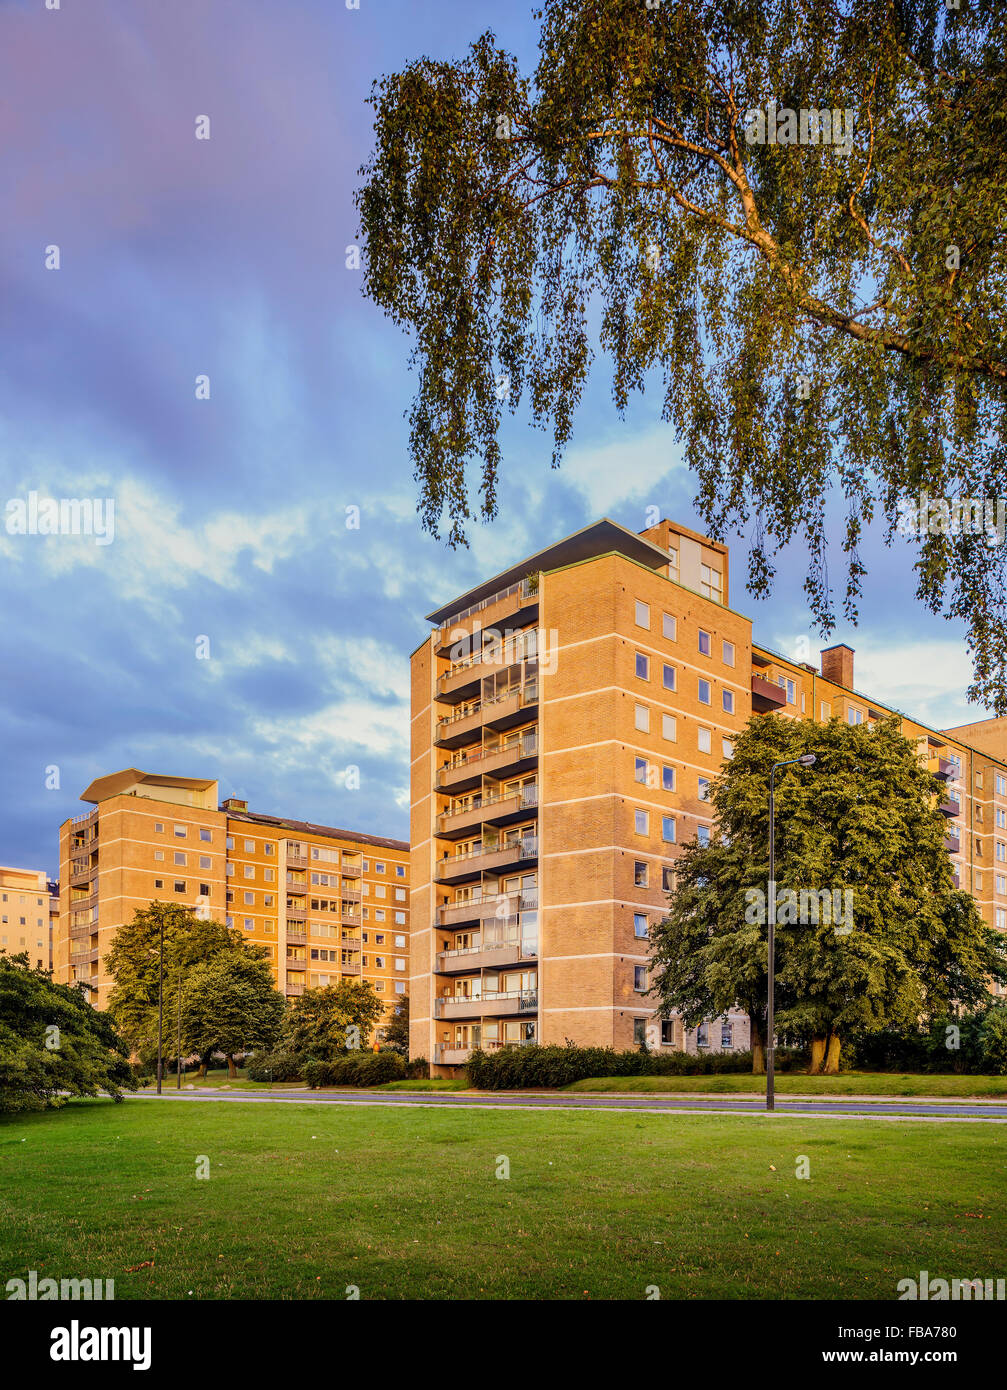 Sweden, Skane, Malmo, View of residential district Stock Photo